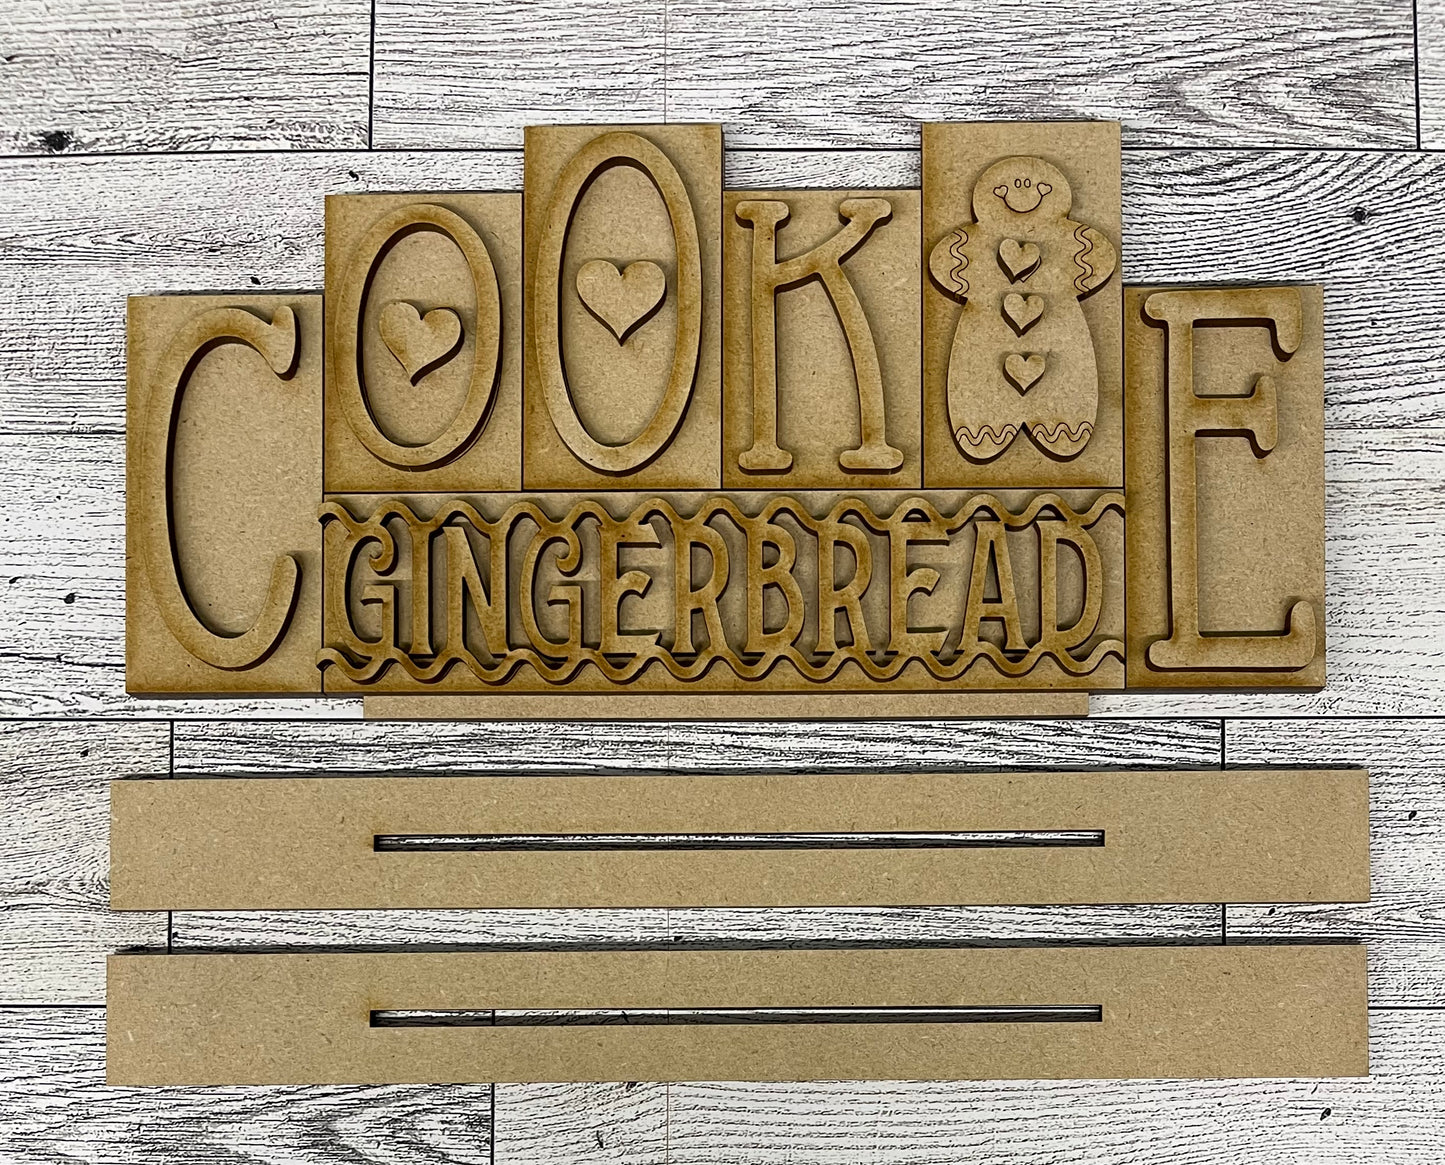 Gingerbread word kit - wood pieces, unpainted wood cutouts, ready for you to paint, scrapbook paper is not included